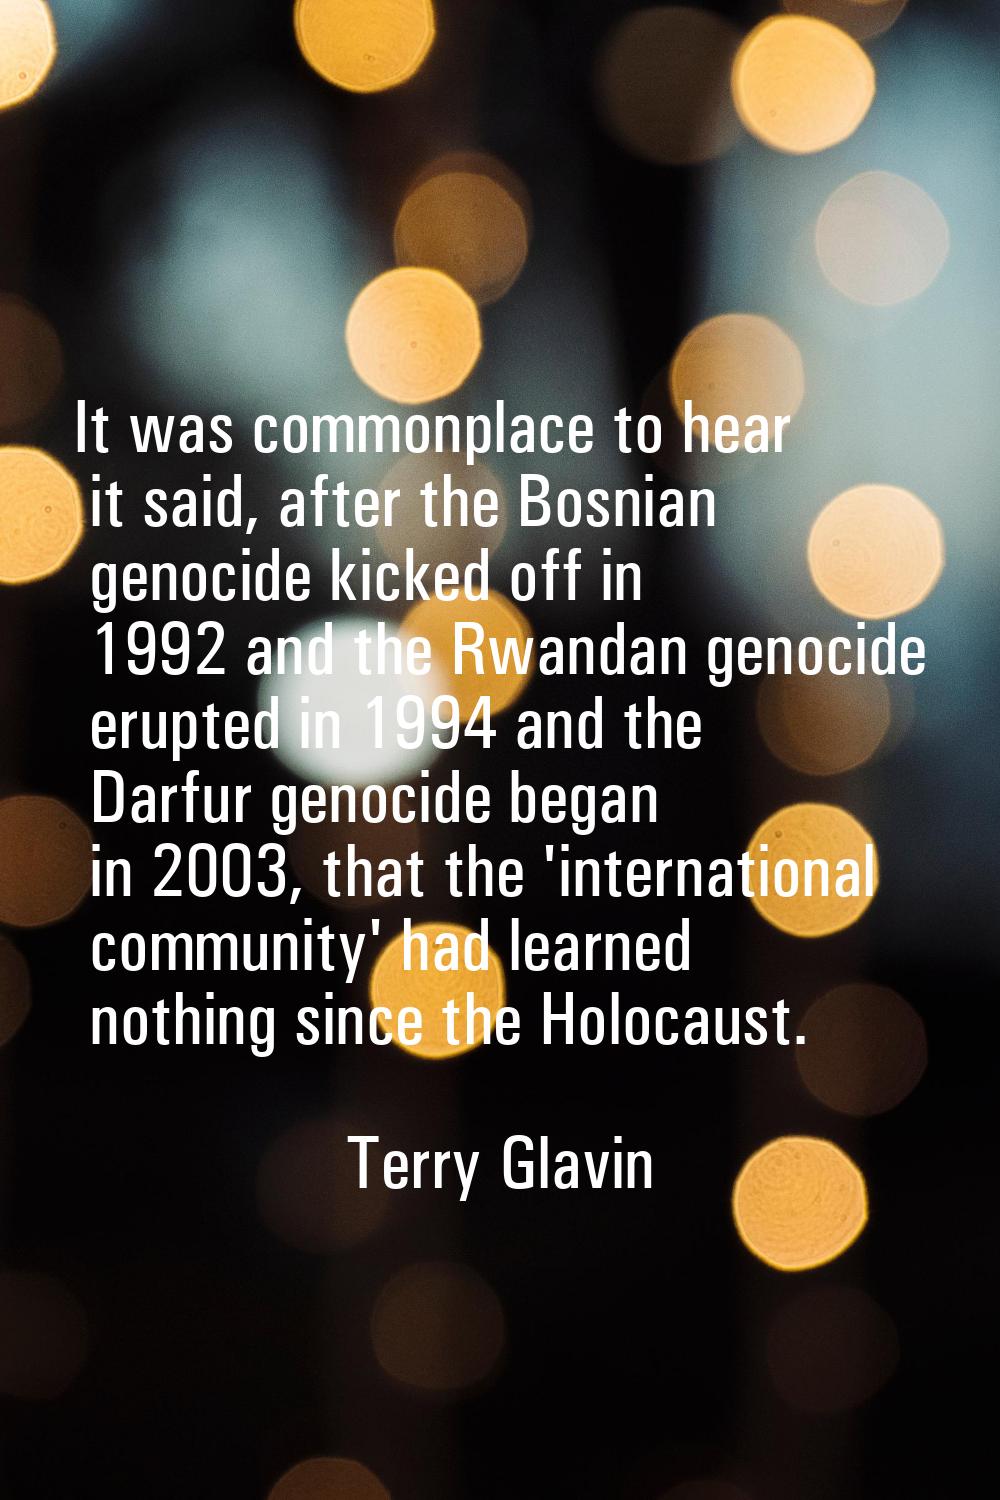 It was commonplace to hear it said, after the Bosnian genocide kicked off in 1992 and the Rwandan g